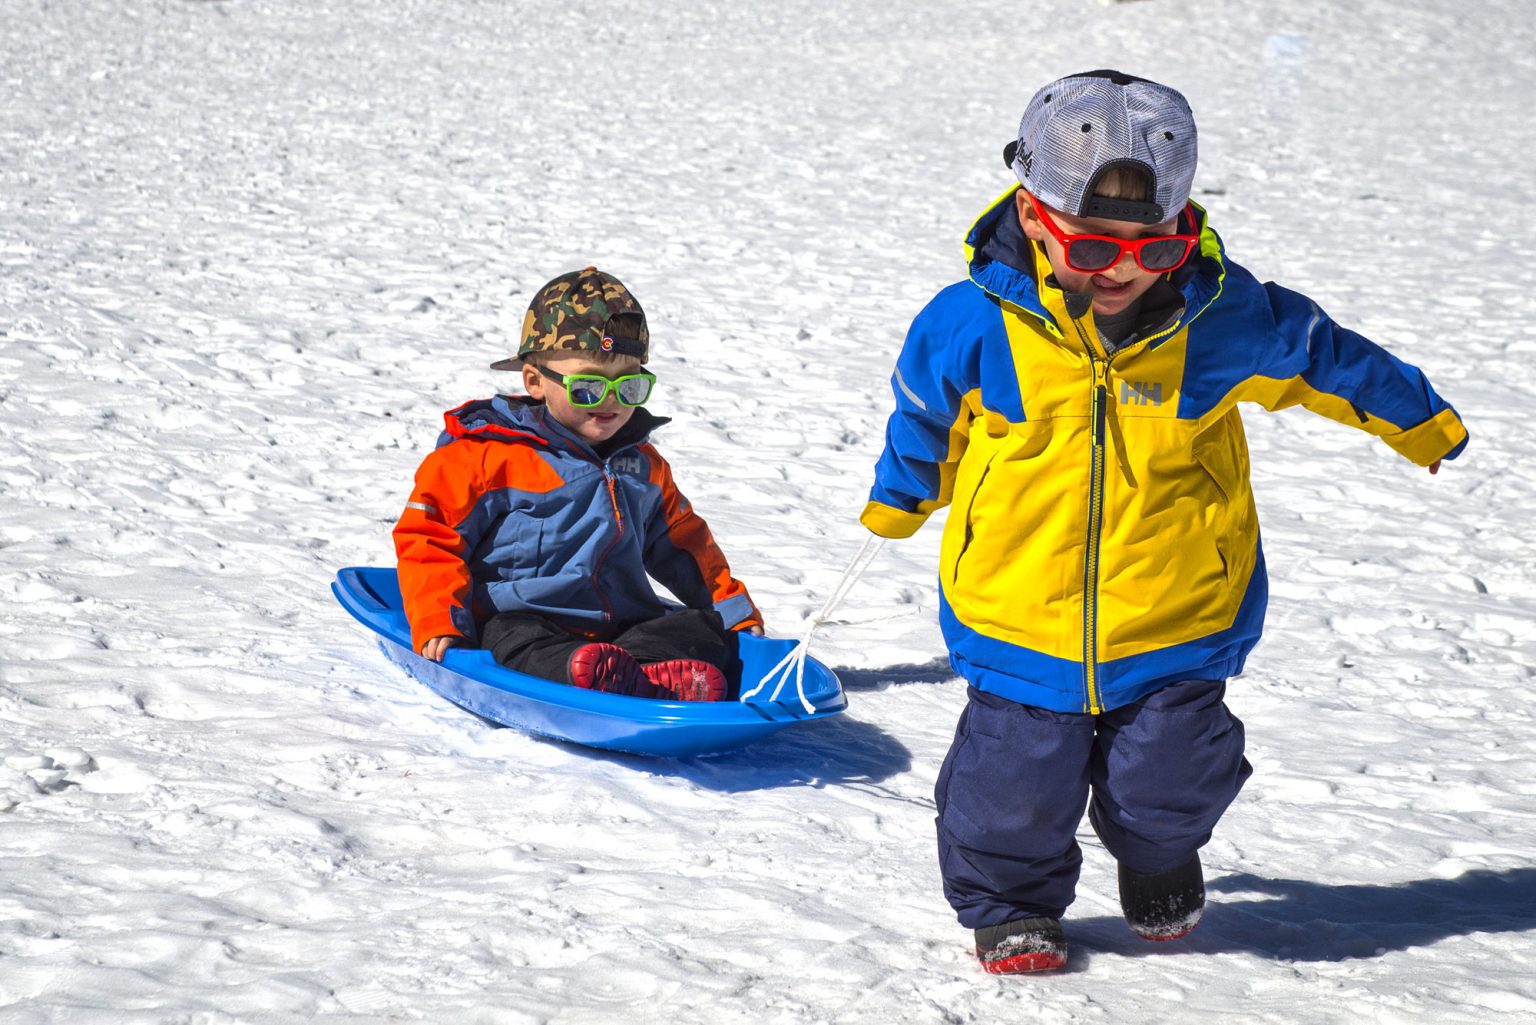 A young boy pulling his friend on a sled over the snow